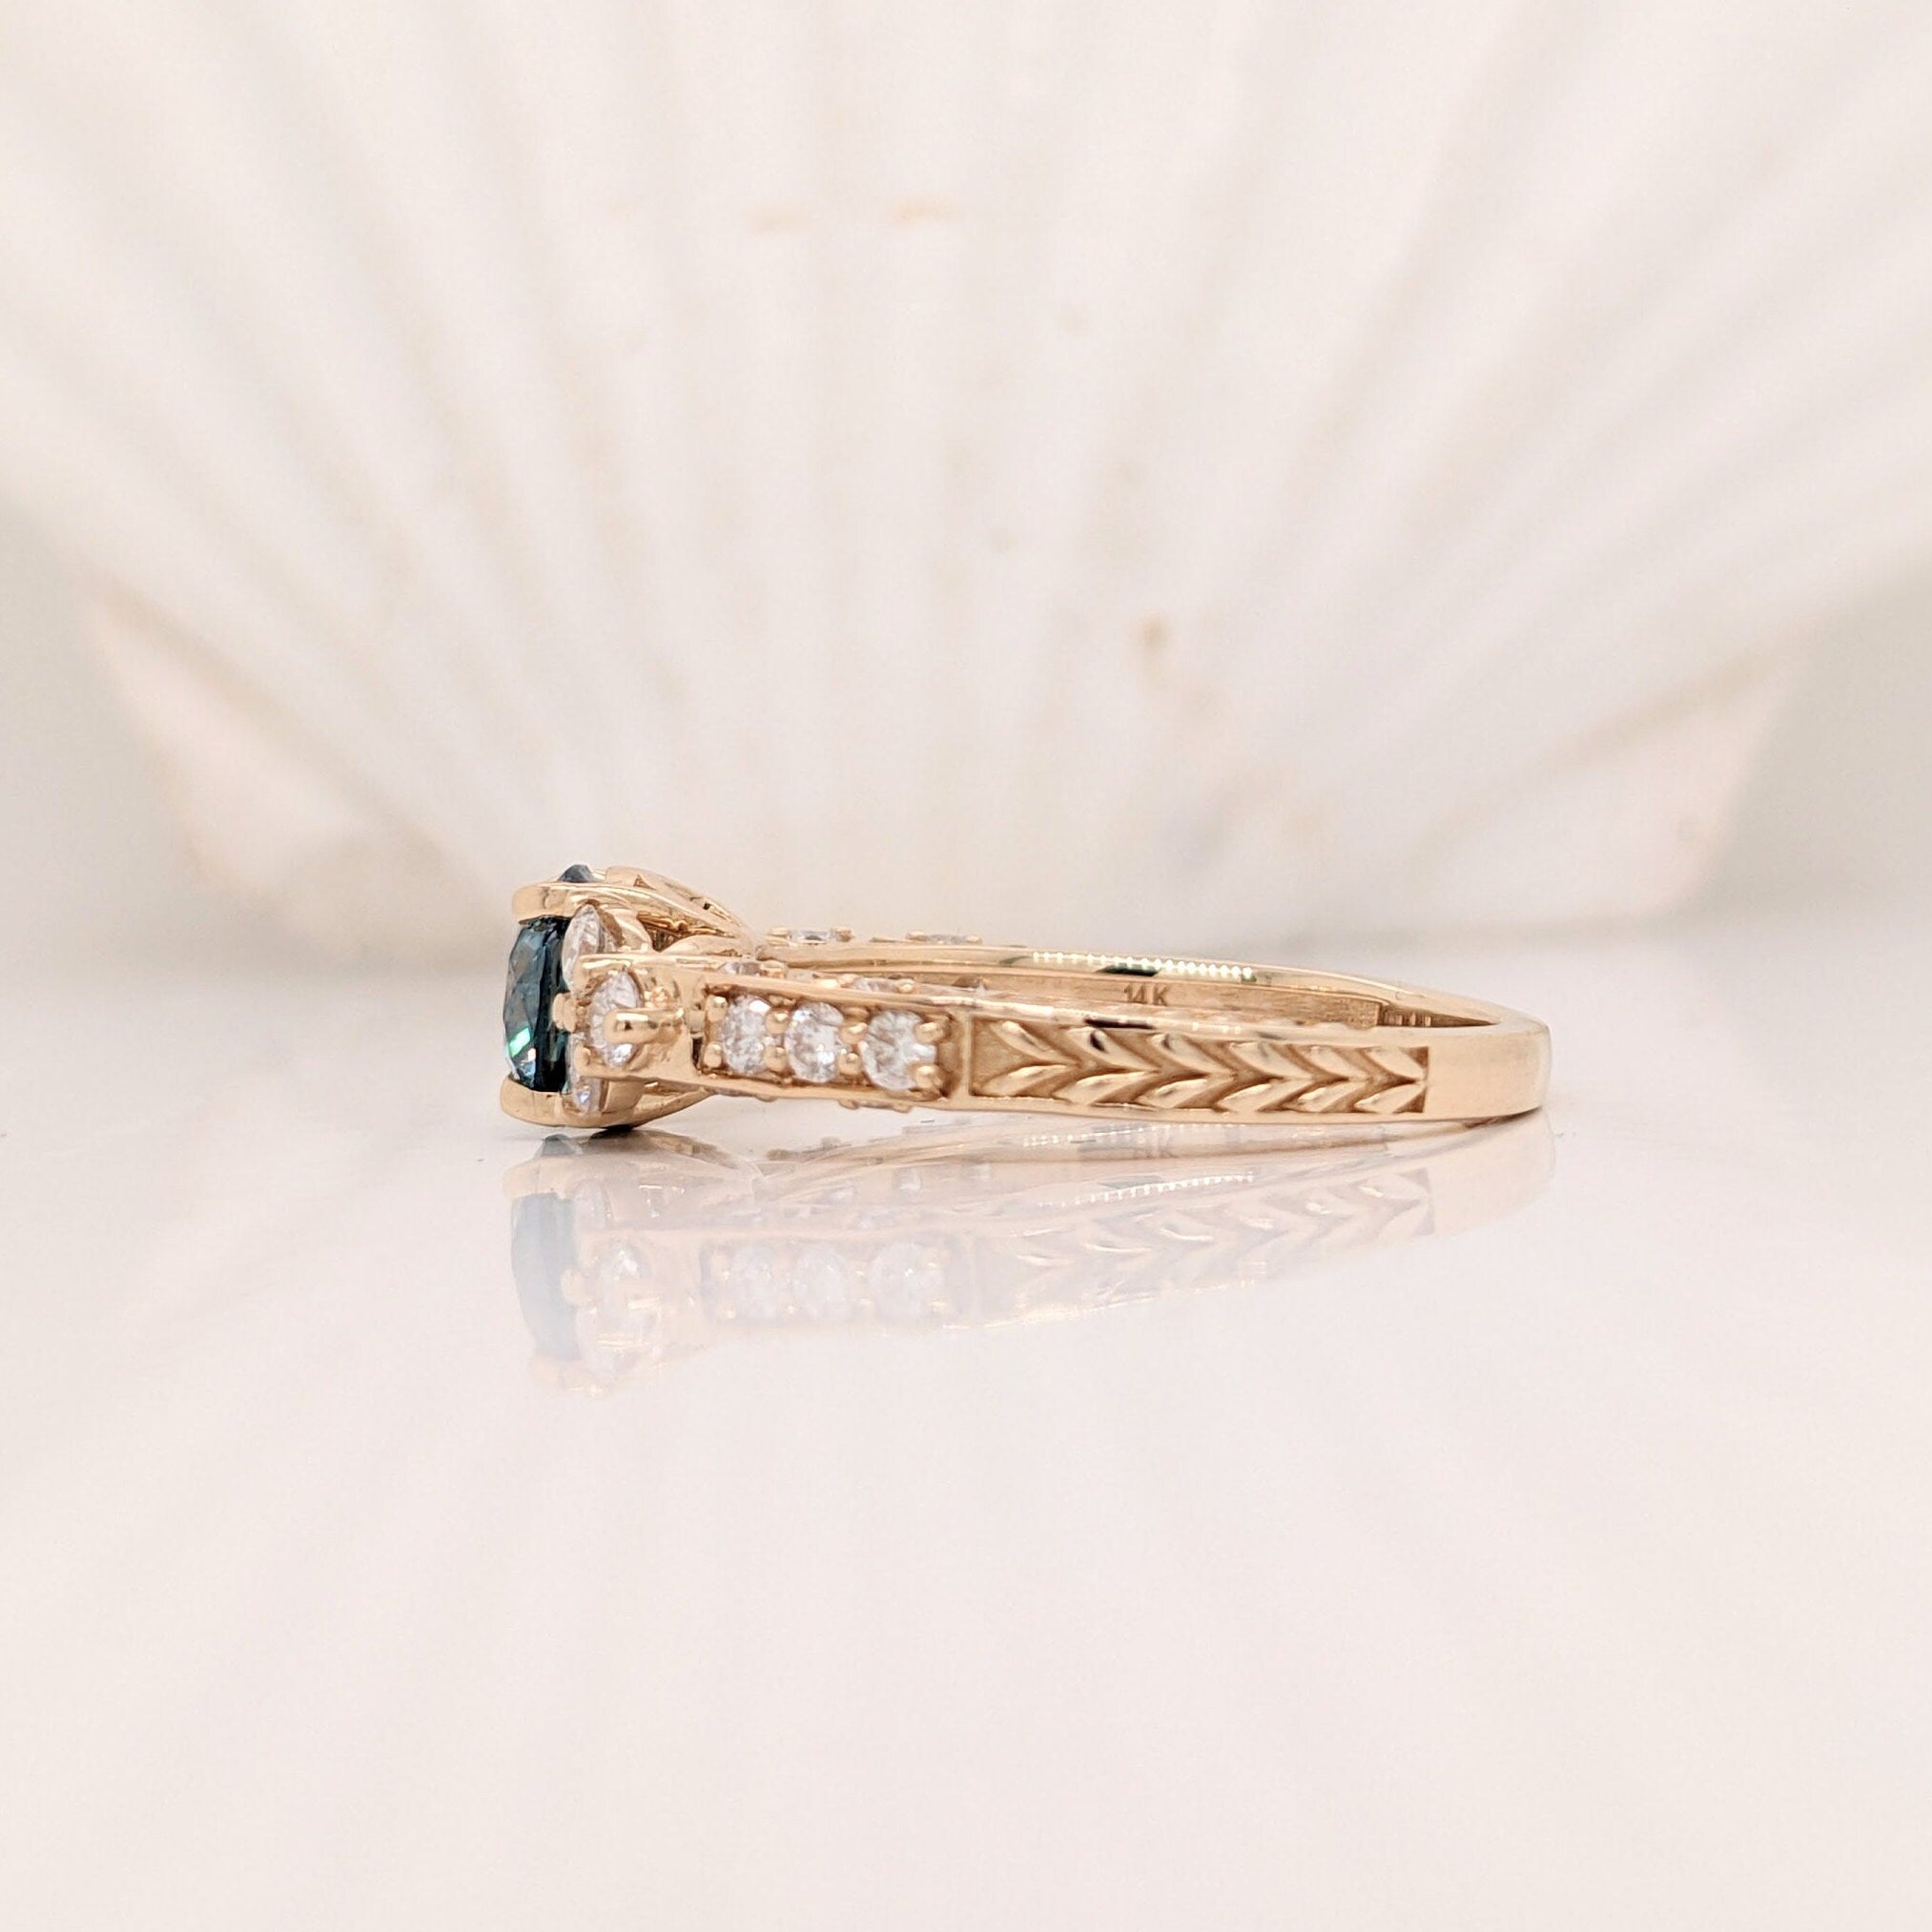 Vintage Inspired Blue Diamond Ring in Solid 14K Gold | Round 6mm | Textured Shank | Art Deco | Wide Band | April Birthstone | Blue Gemstone